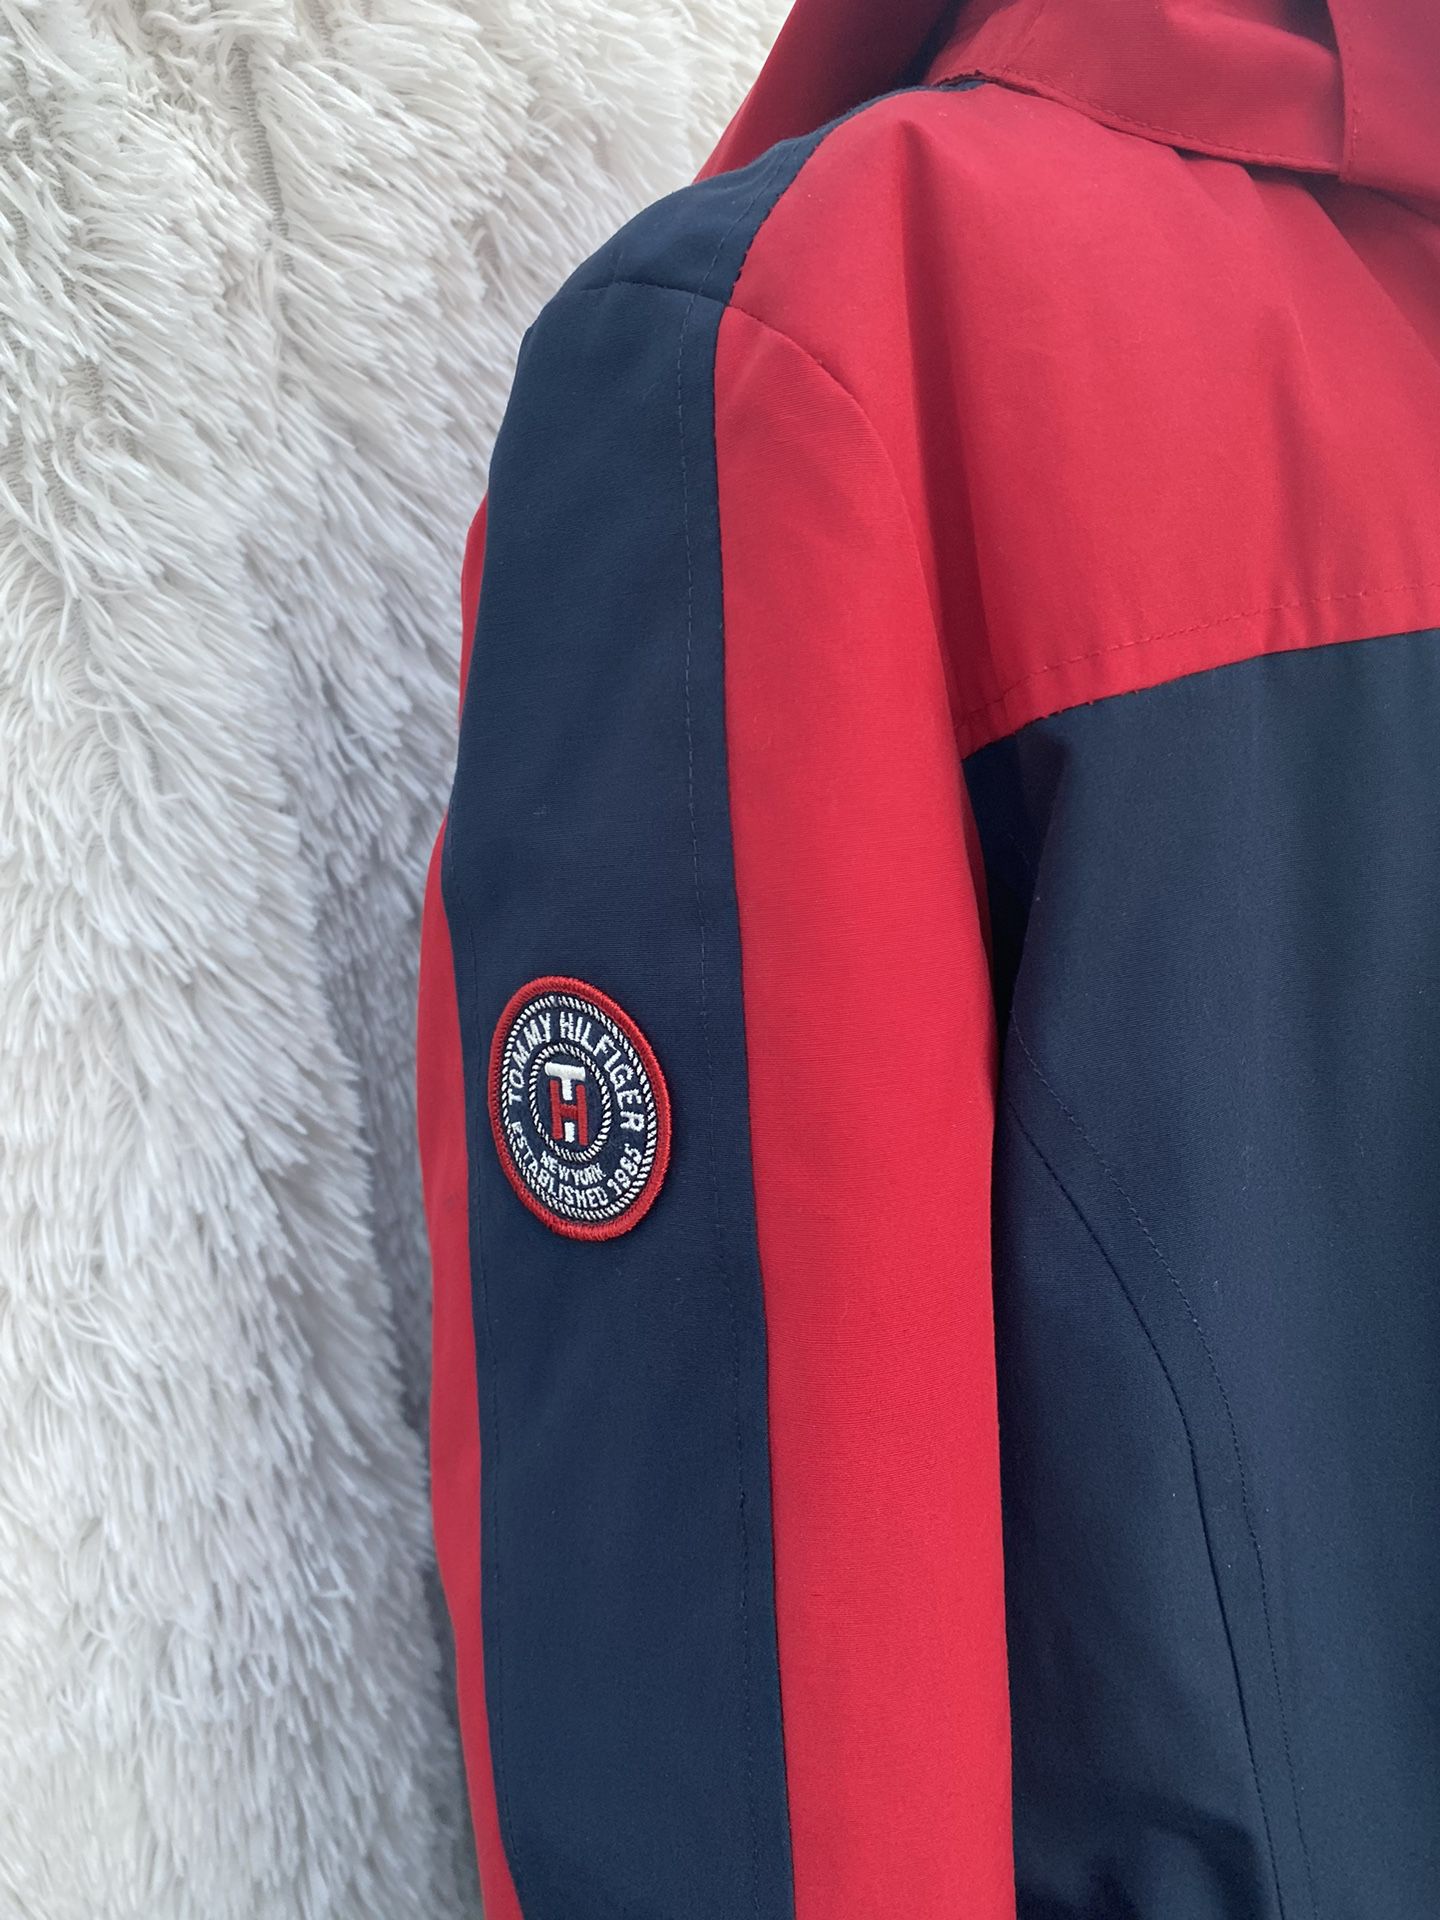 New - Tommy Hilfiger 3-1 Jacket In Size Small